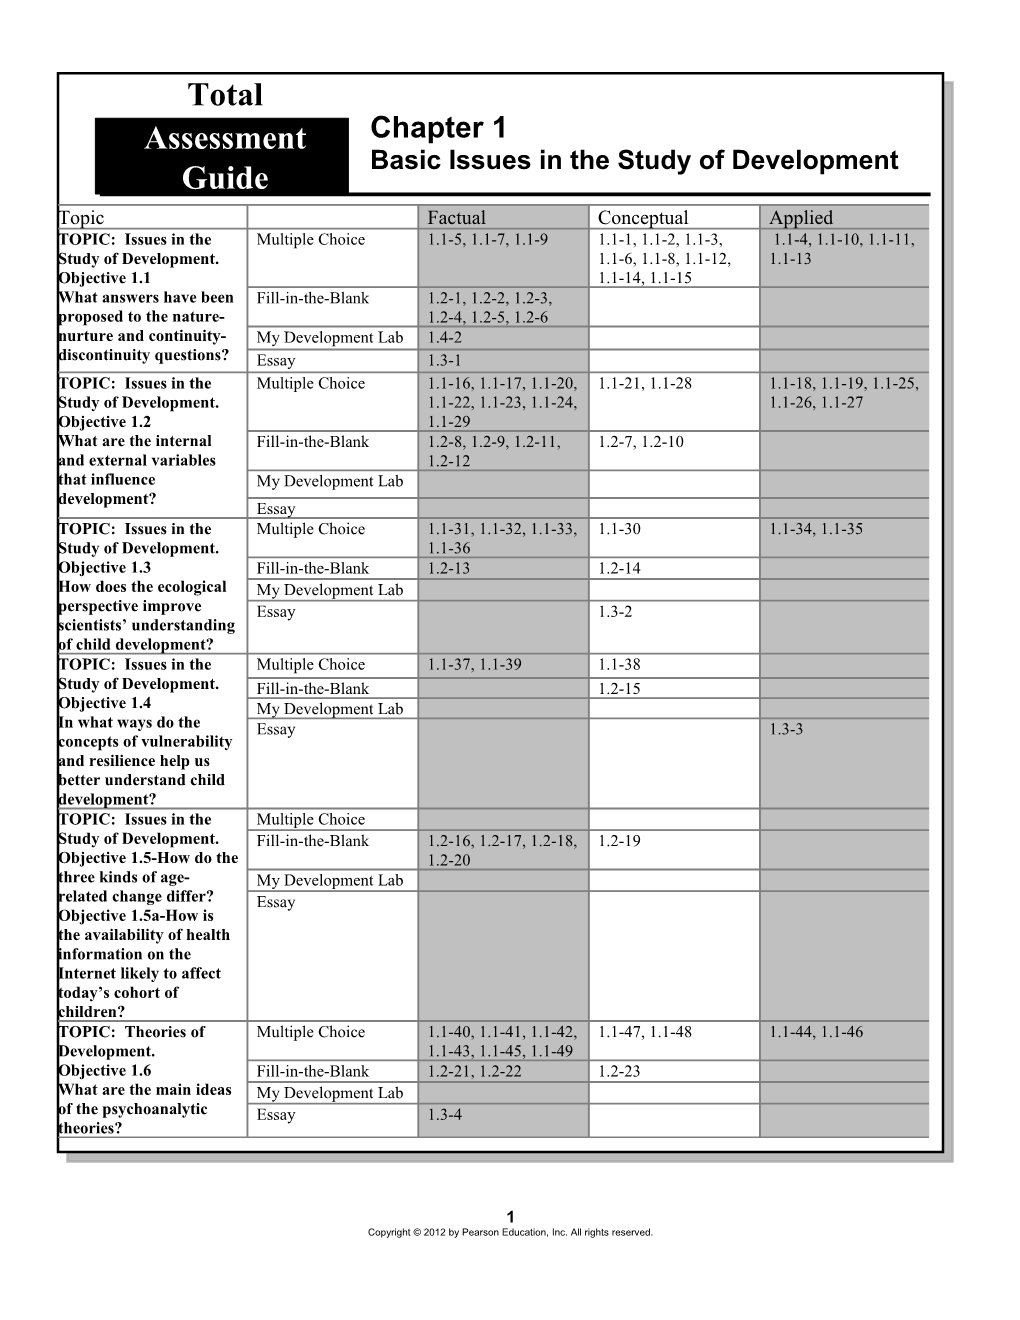 Chapter 1: Basic Issues in the Study of Development